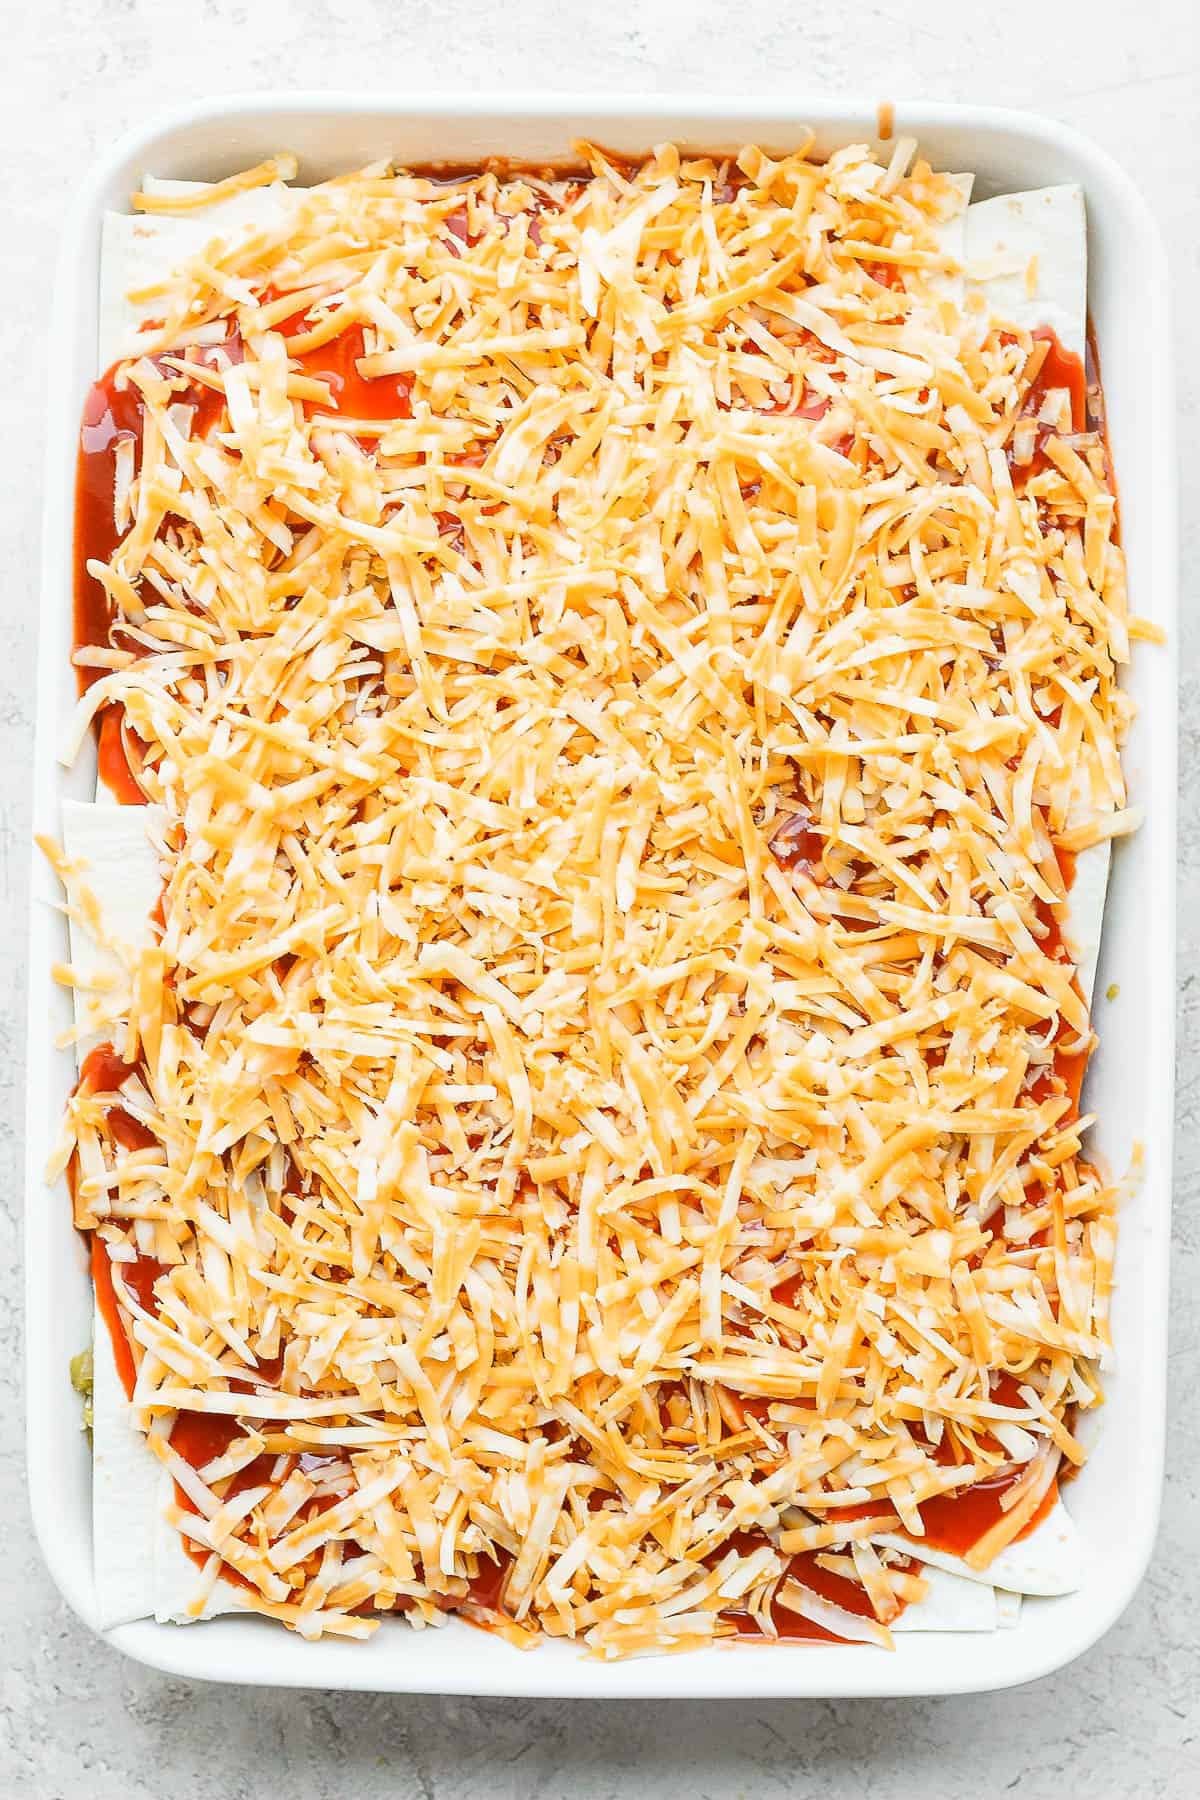 A fully layered chicken enchilada casserole before baking.